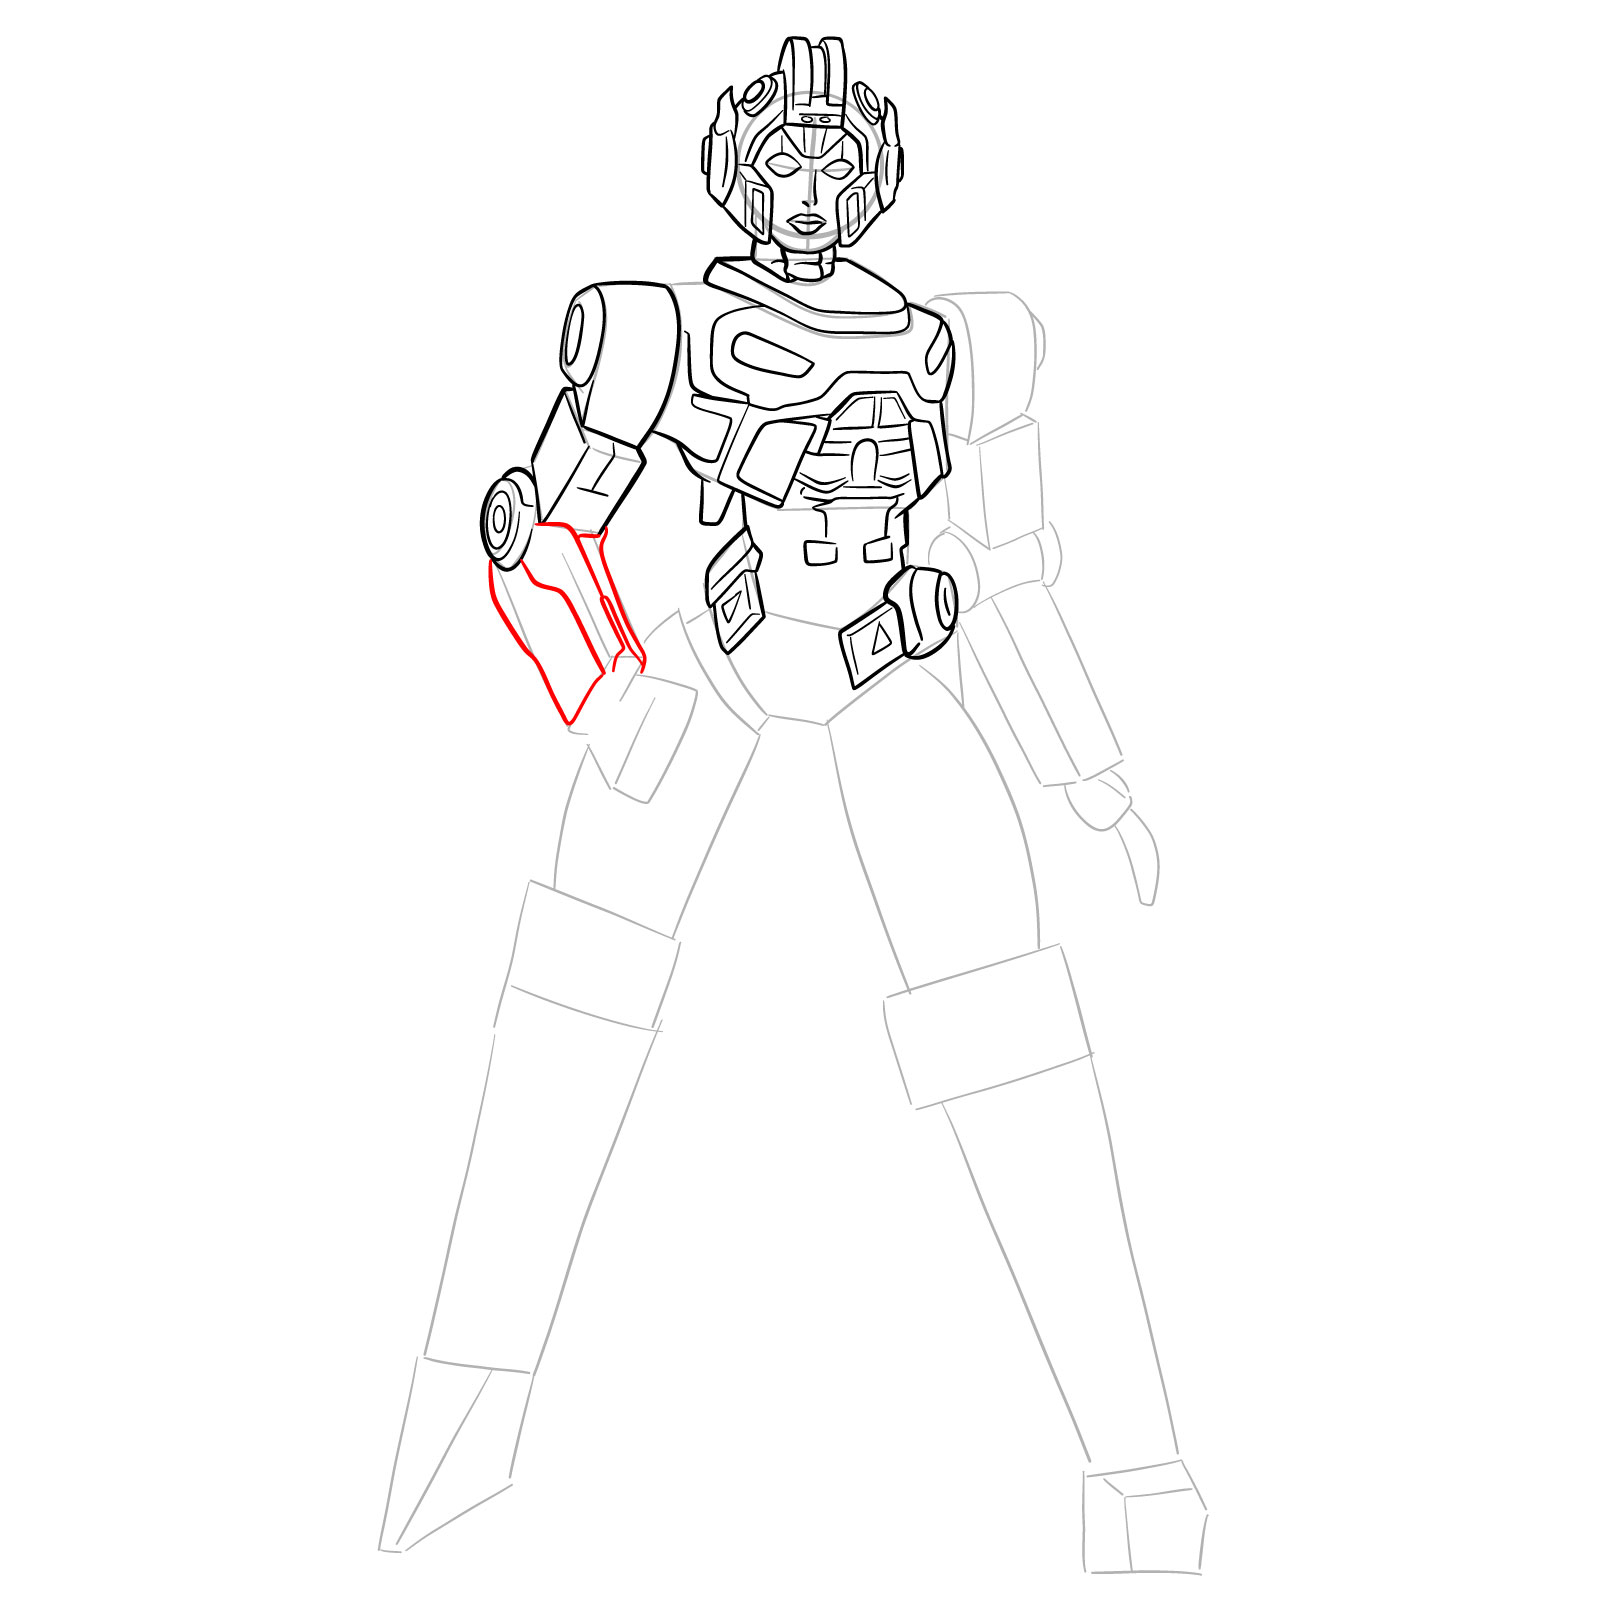 How to draw Arcee from Transformers Prime - step 22